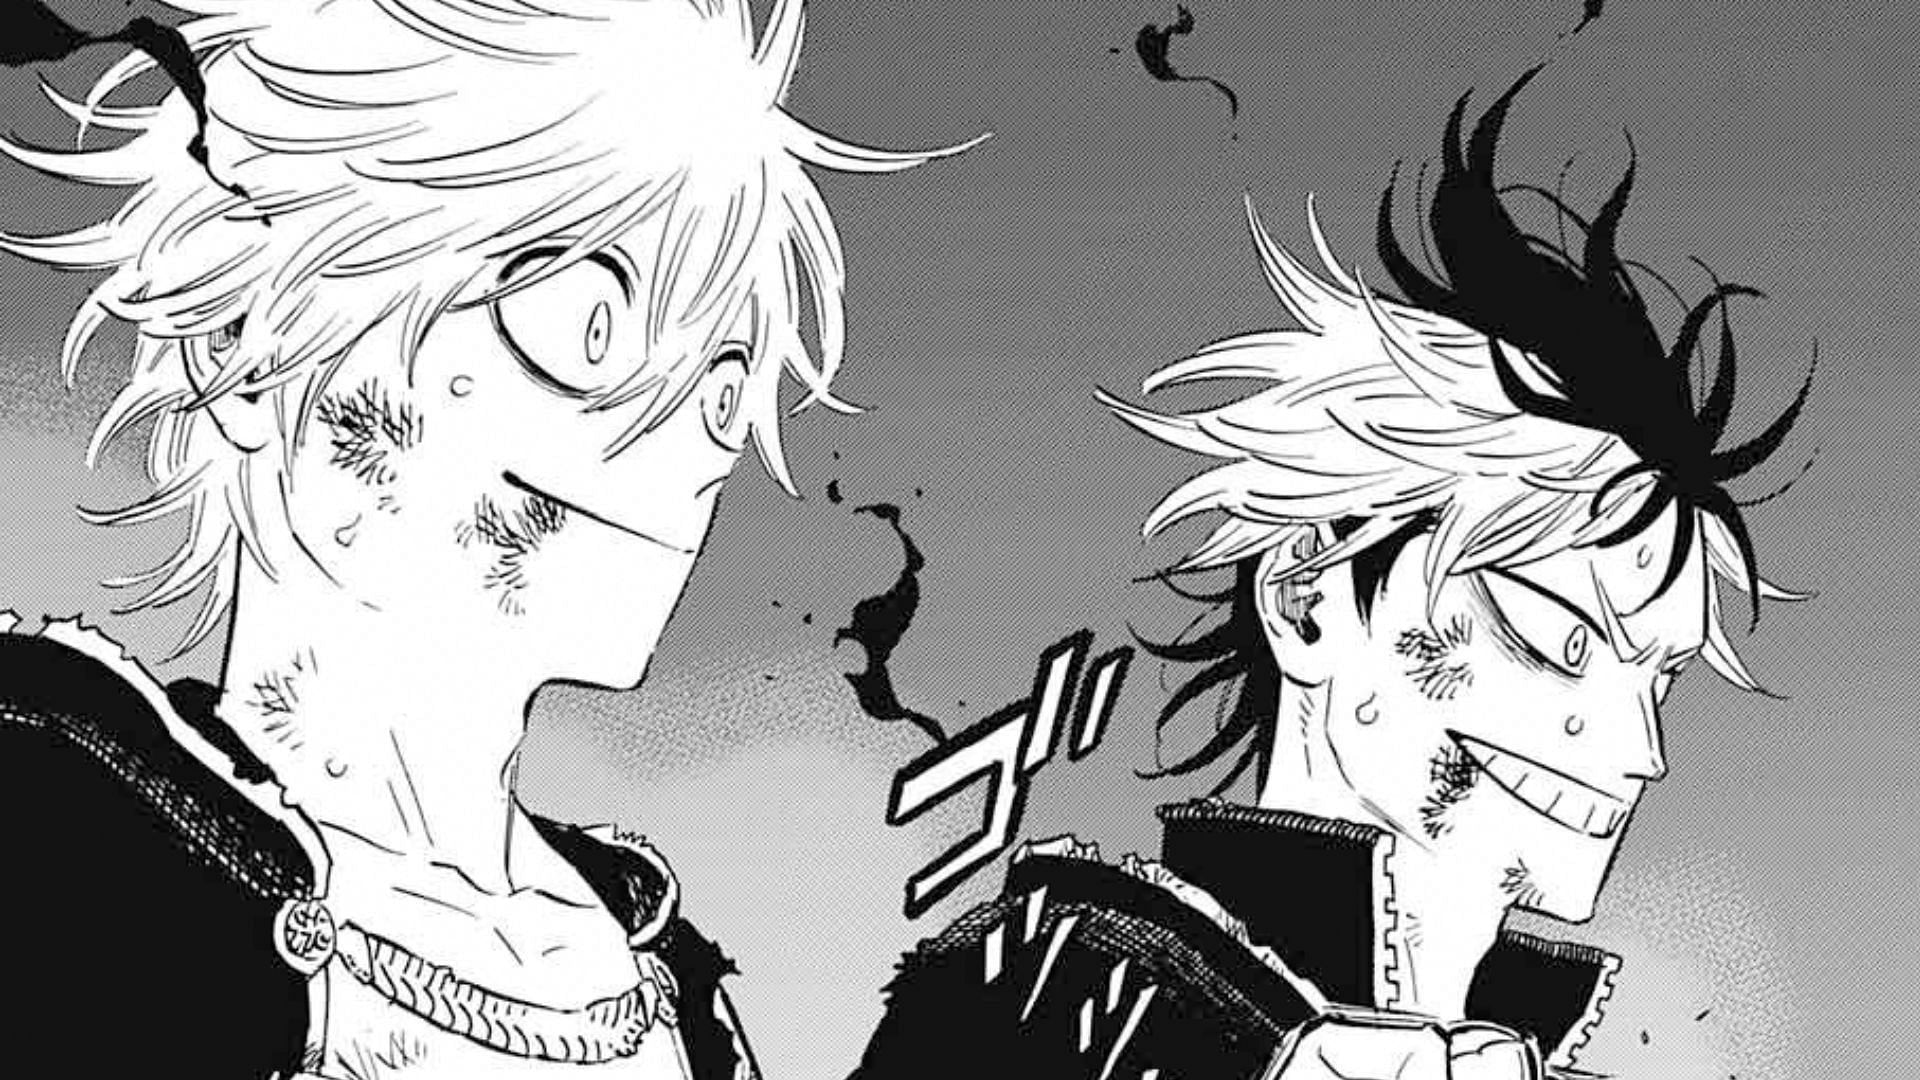 Luck and Magna as seen in Black Clover chapter 369 (Image via Shueisha)